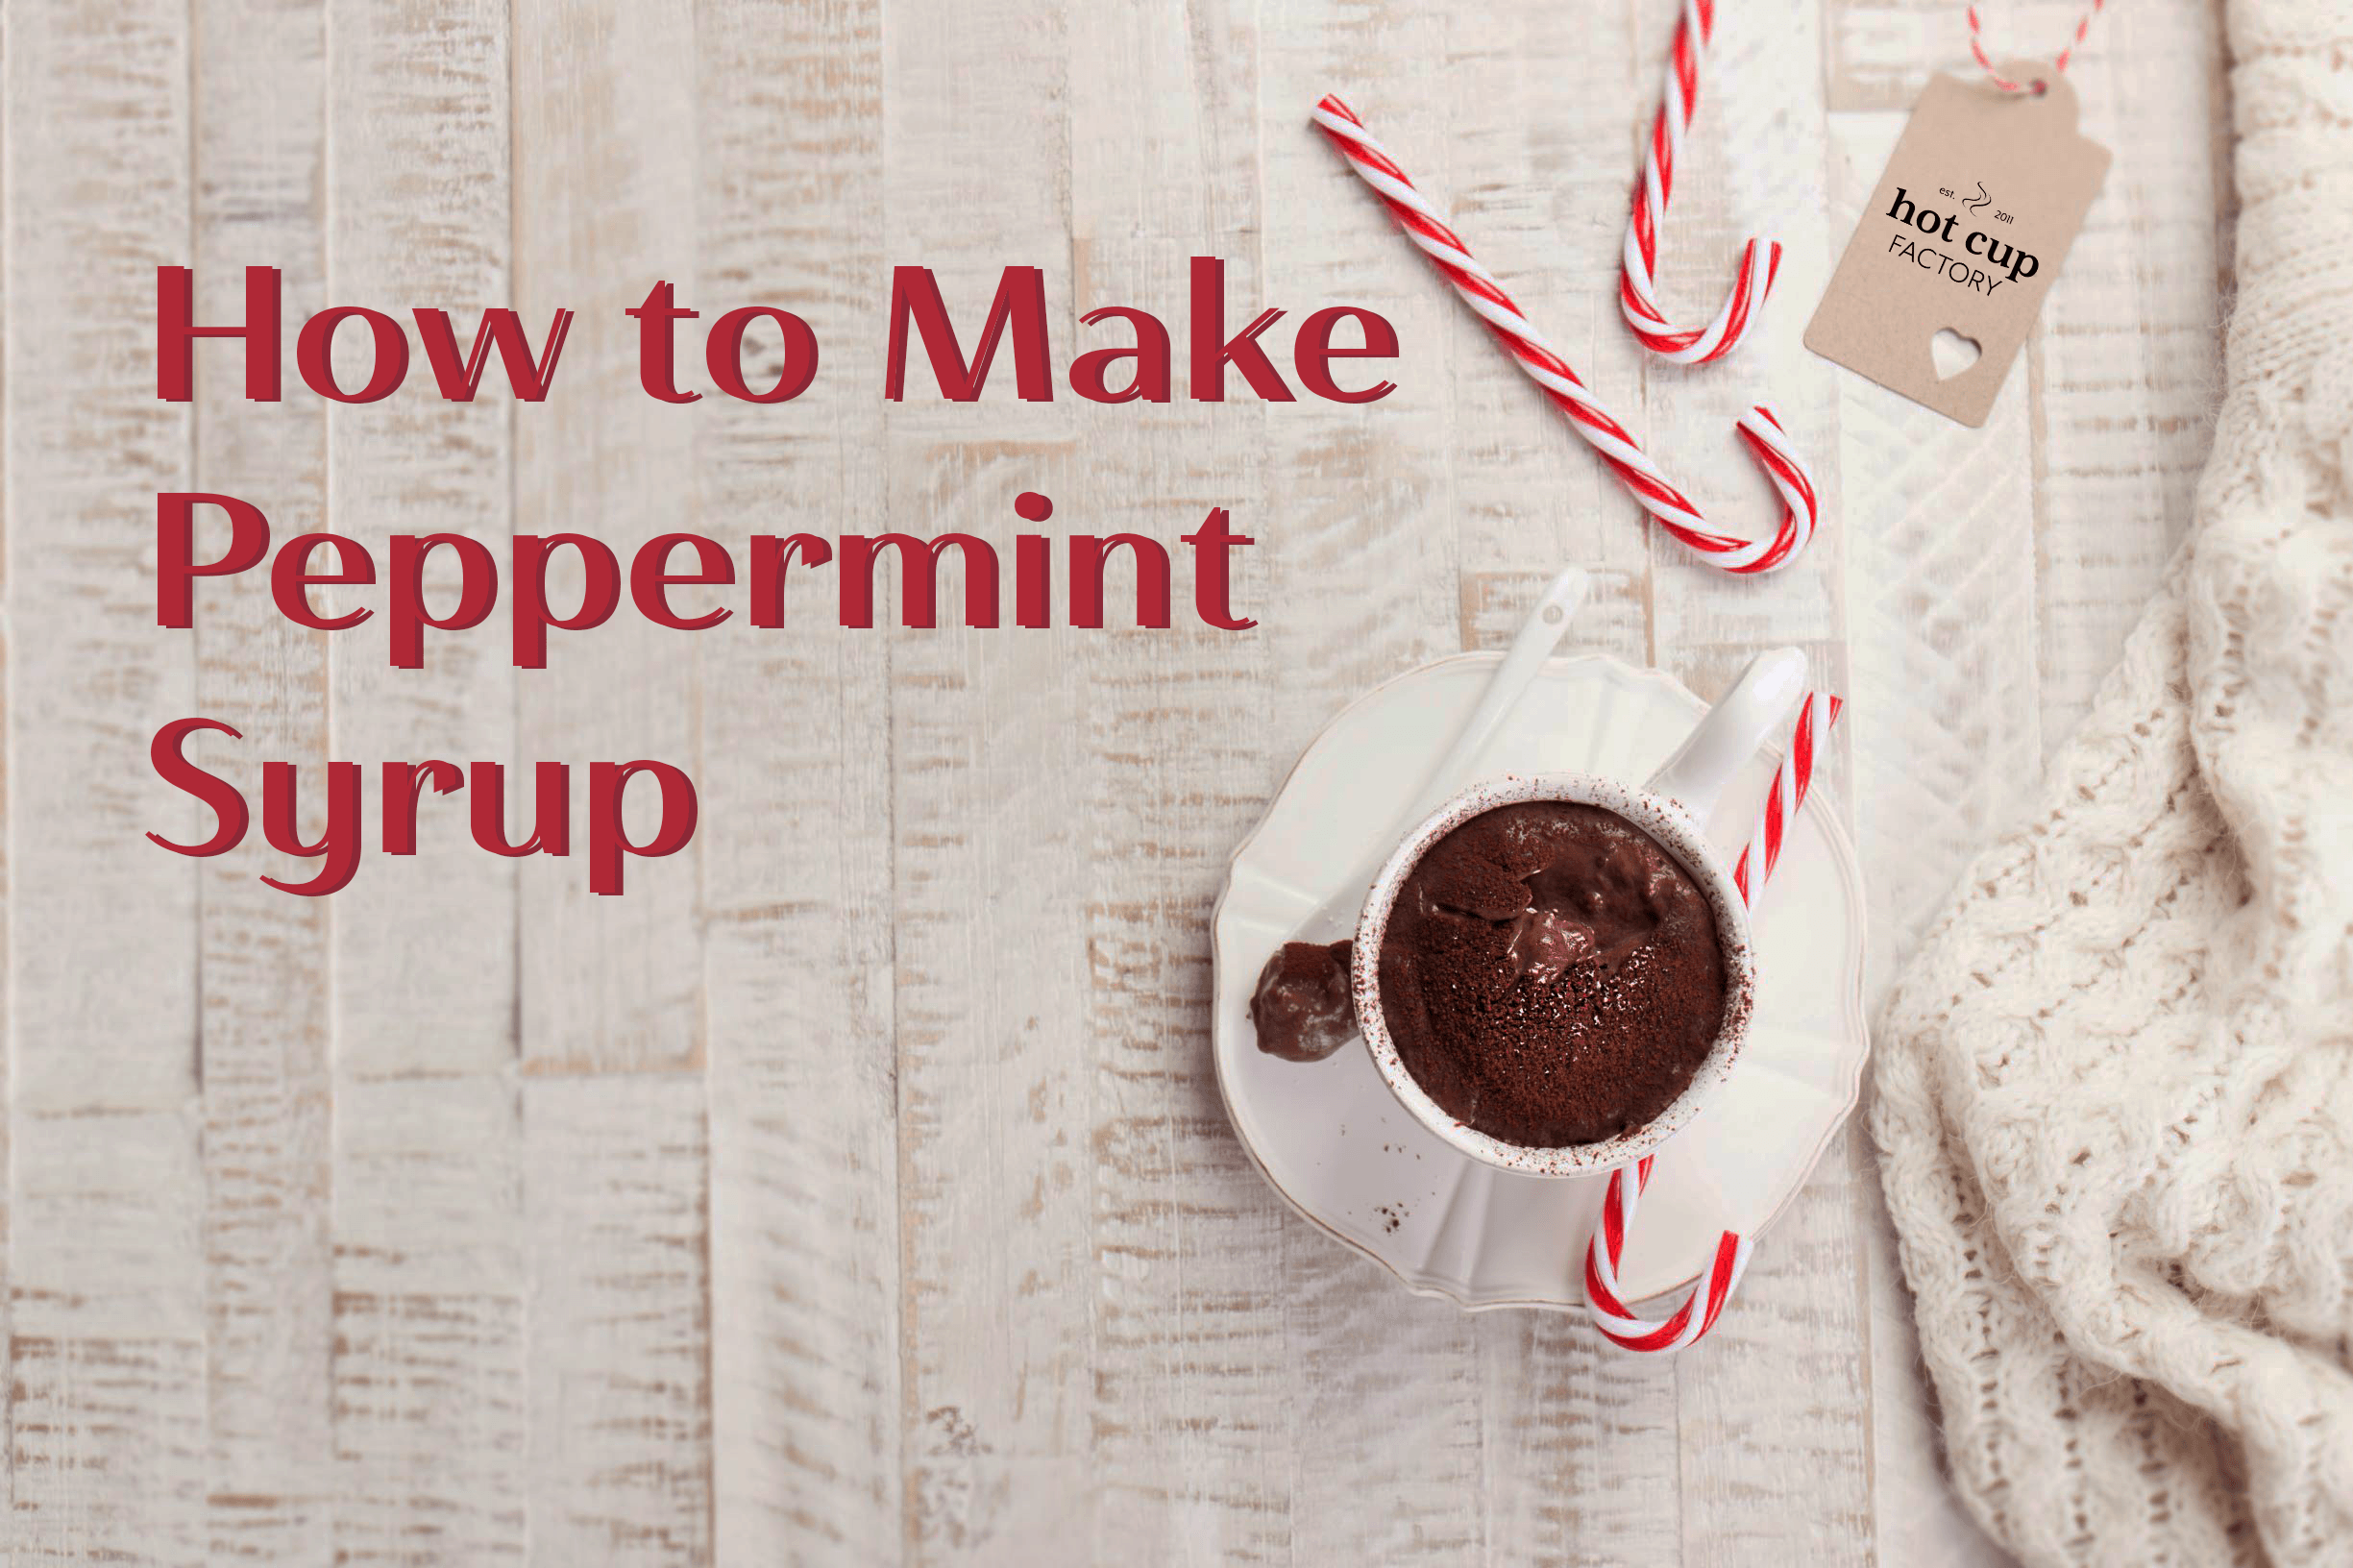 How to Make Peppermint Syrup - Hot Cup Factory